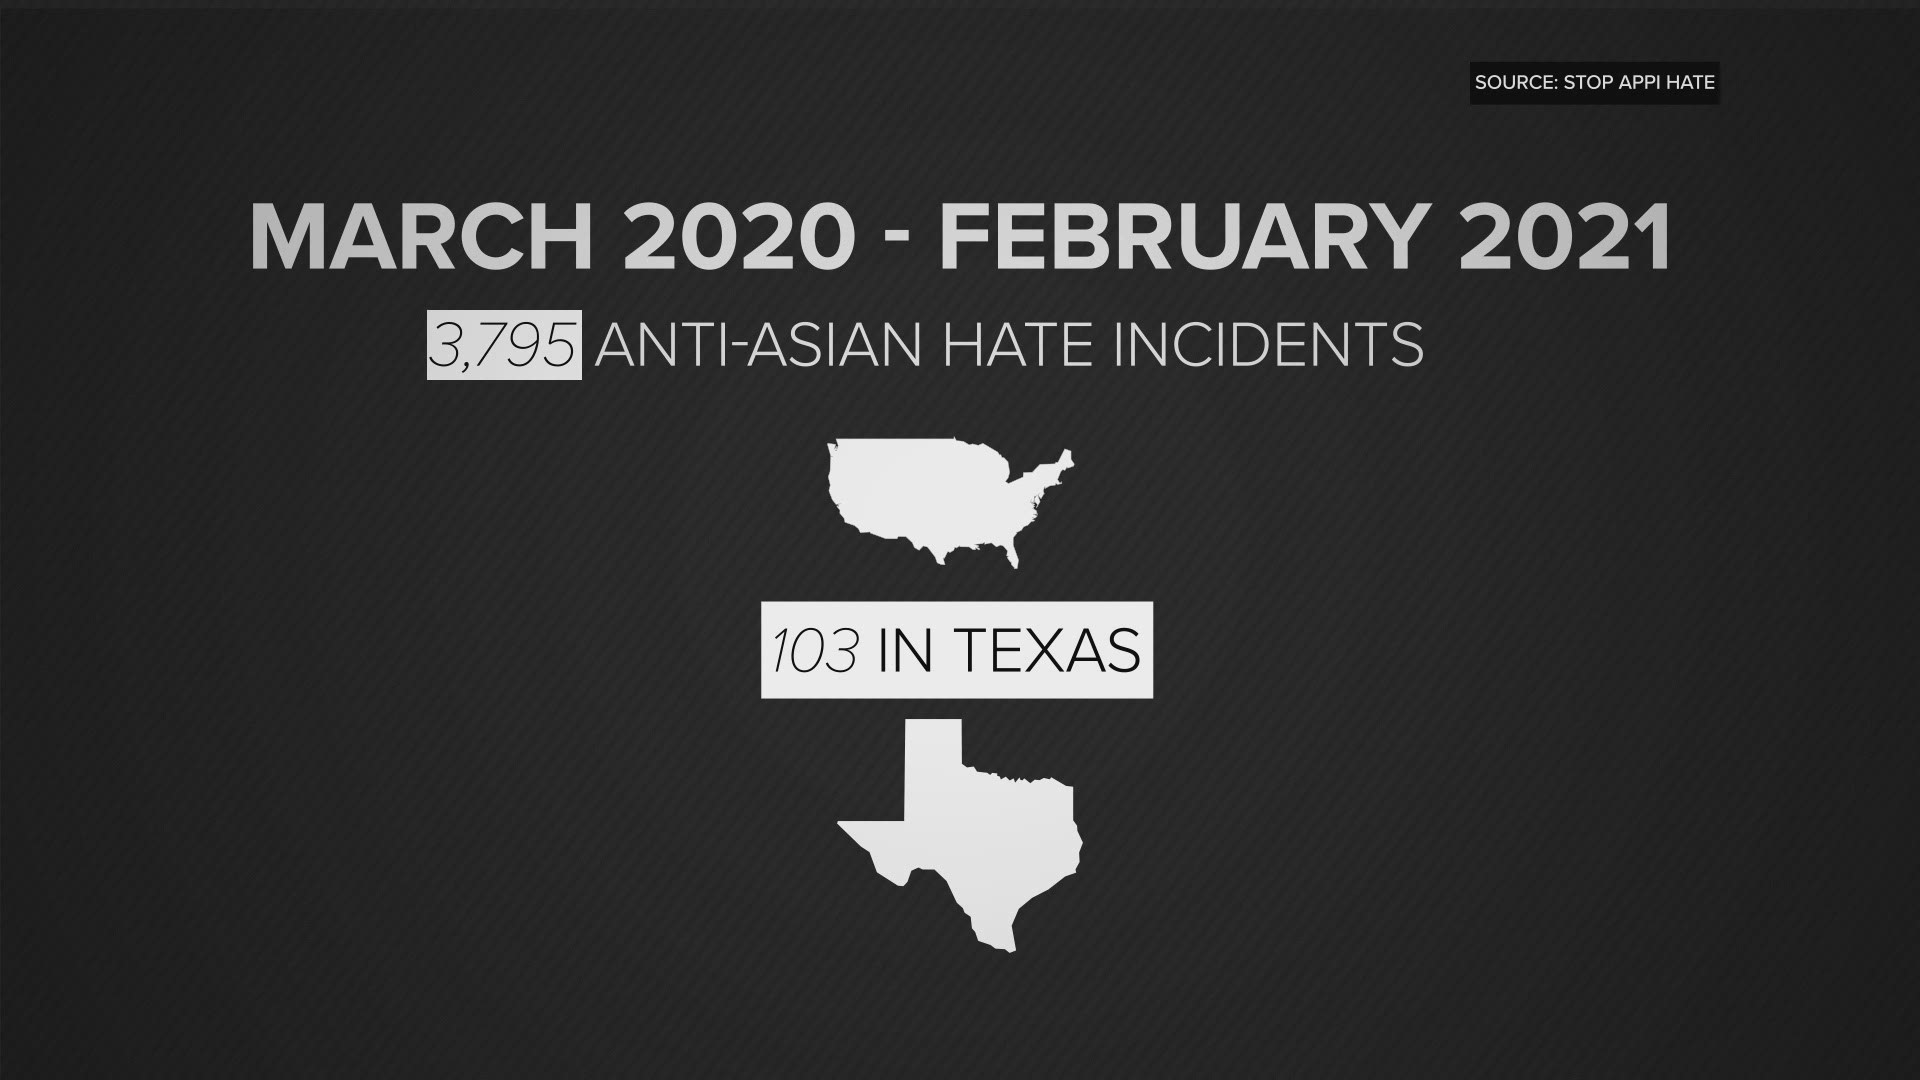 Asian-Americans were targeted in nearly 3,800 hate incidents in the past year. Texas was ranked 4th highest with 103 cases, according to Stop AAPI Hate.